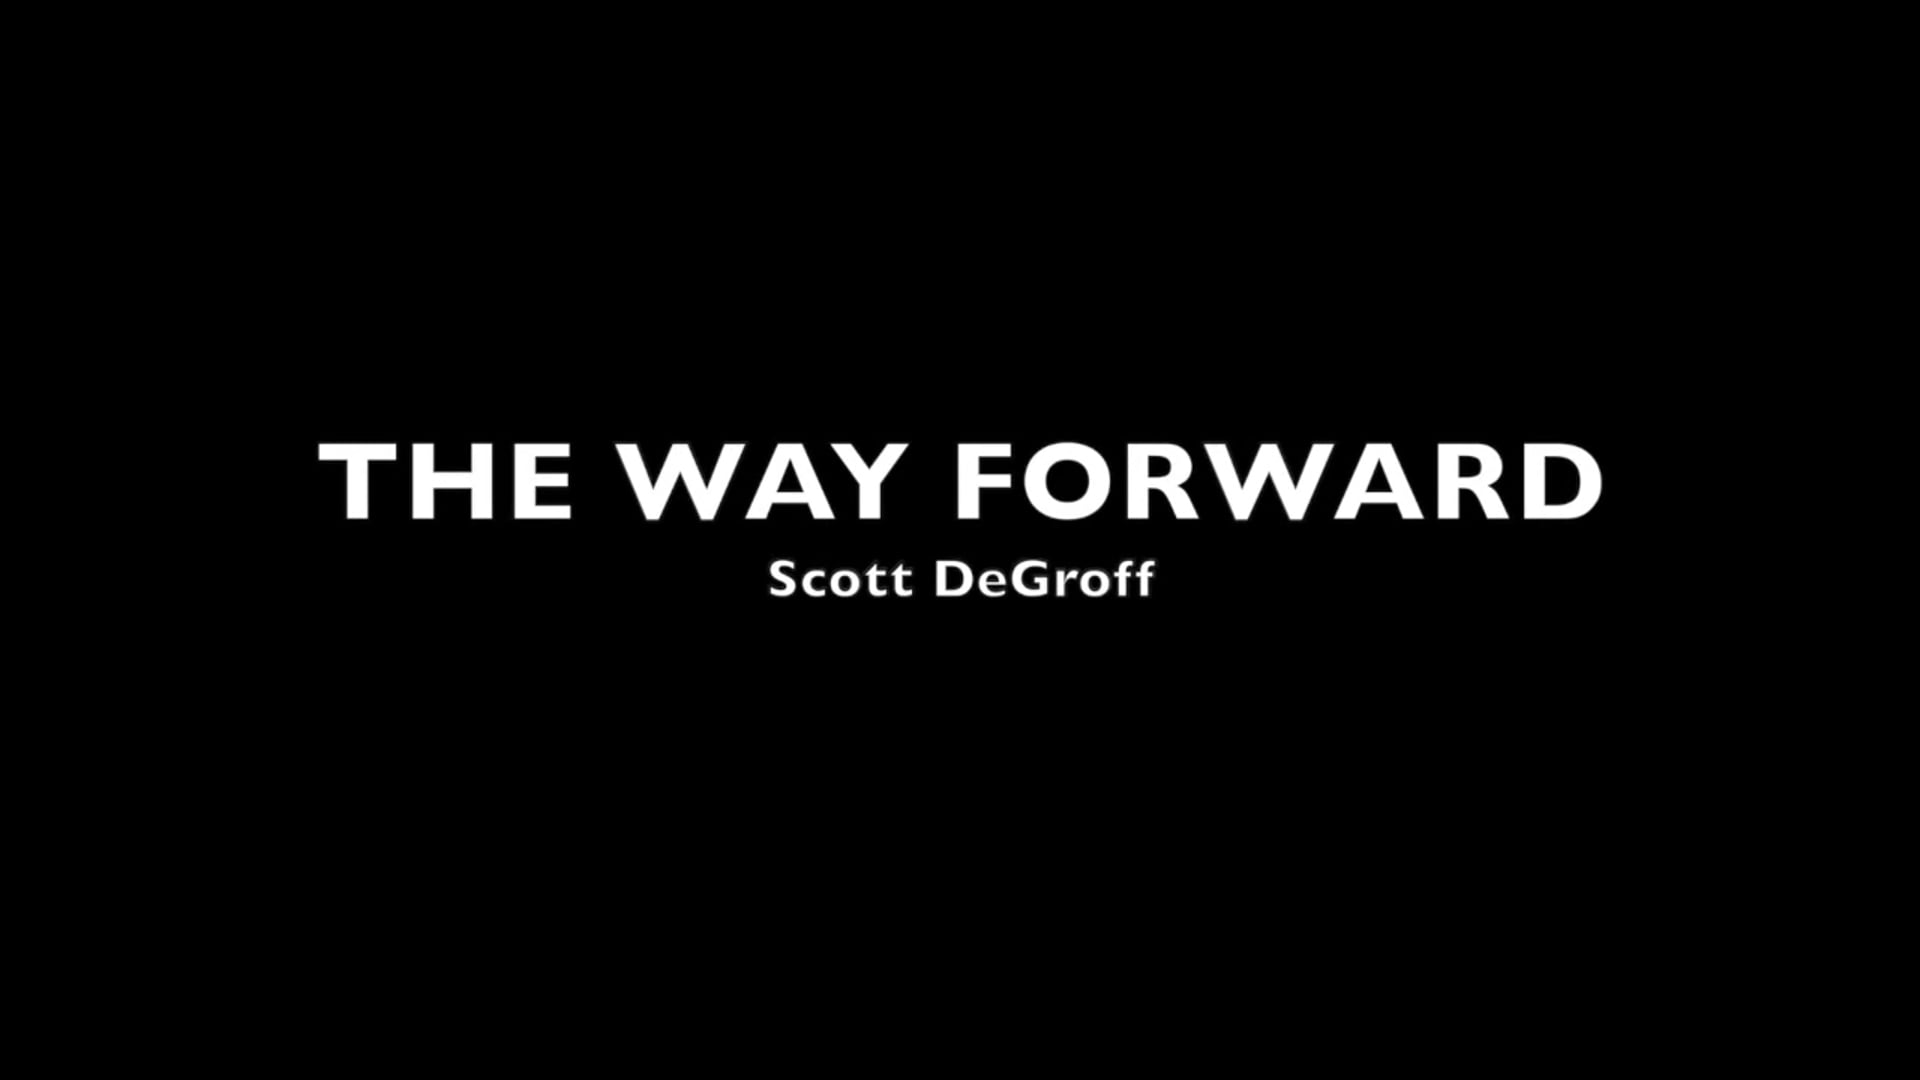 The Way Forward - Part 1 of 2